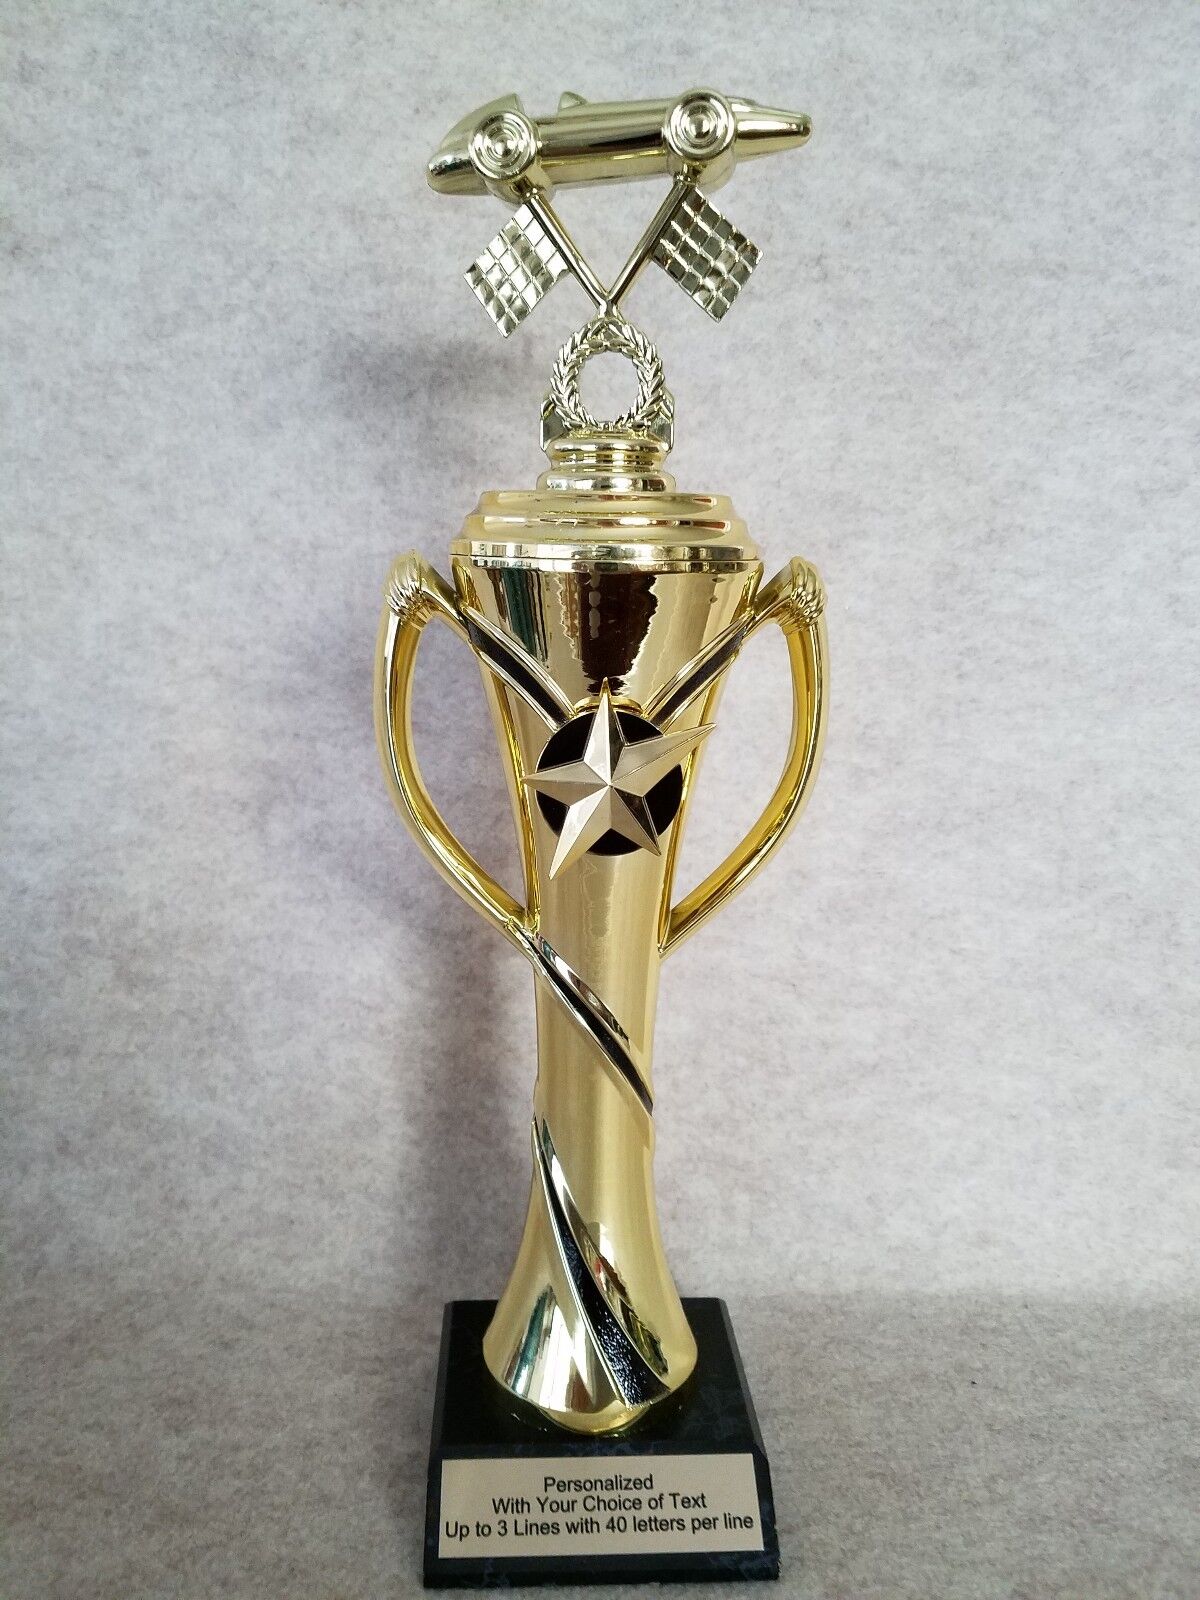 Pinewood Derby Cub Scouts Victory Cup Trophy w/ free personalized plaque Trophy